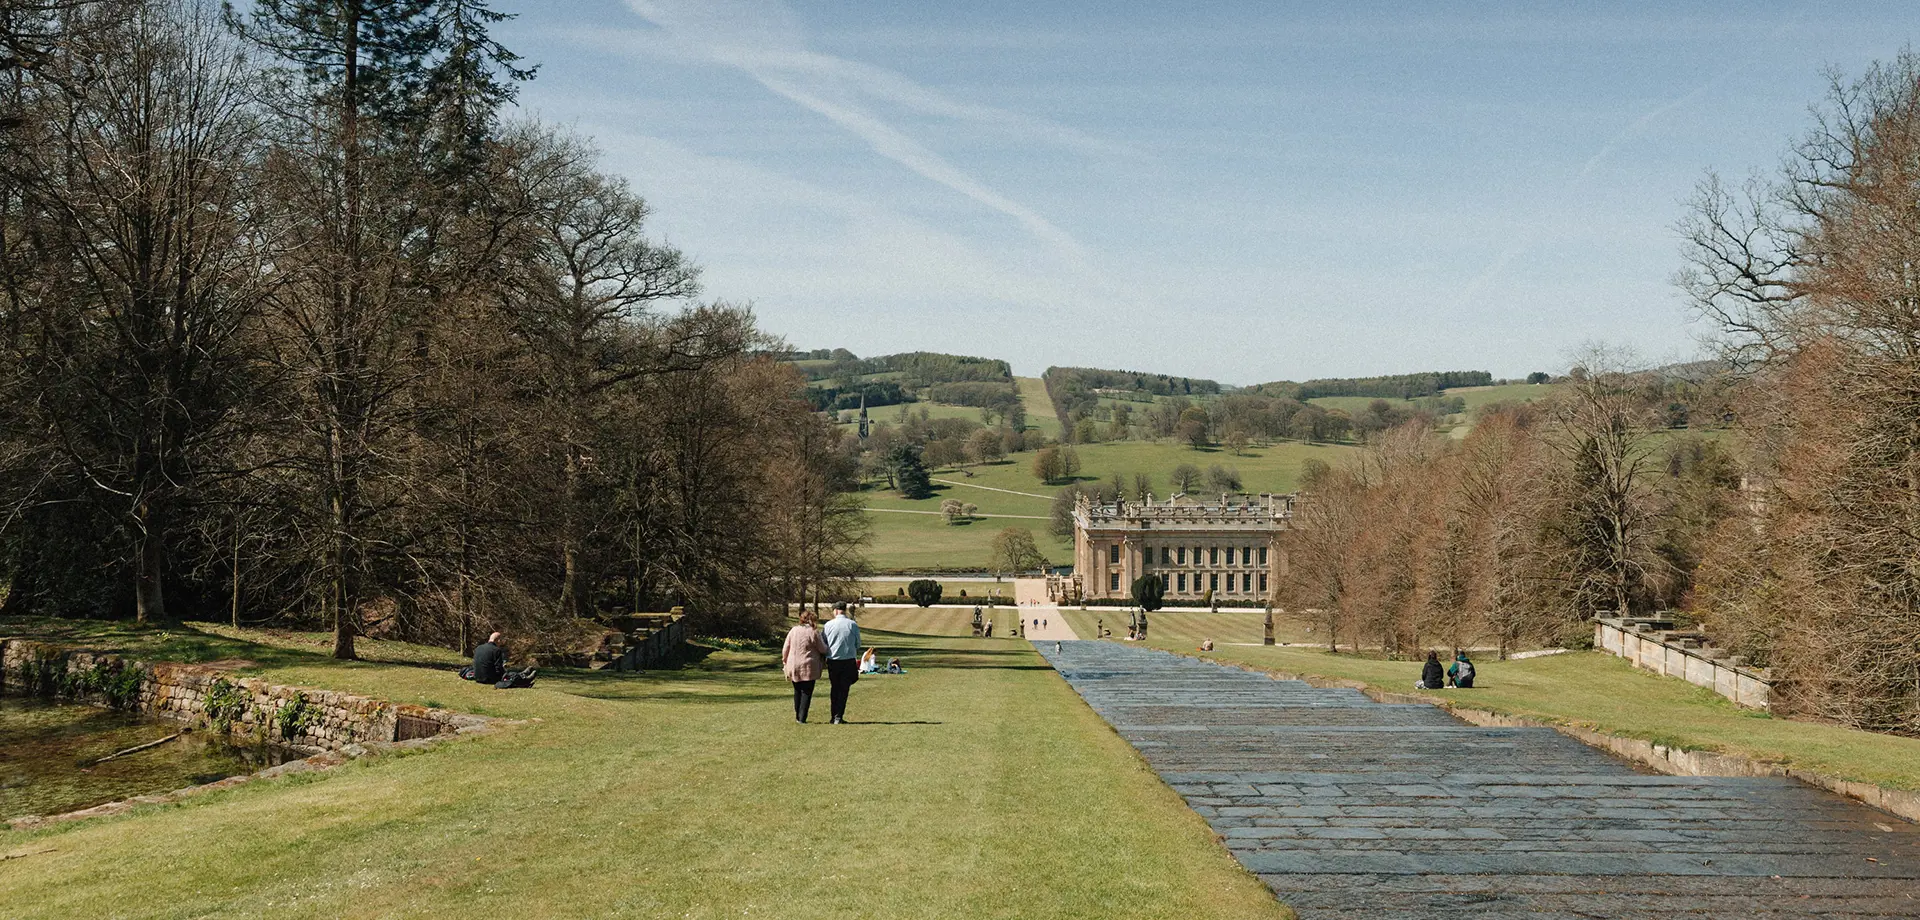 What's new in the Chatsworth Garden? 